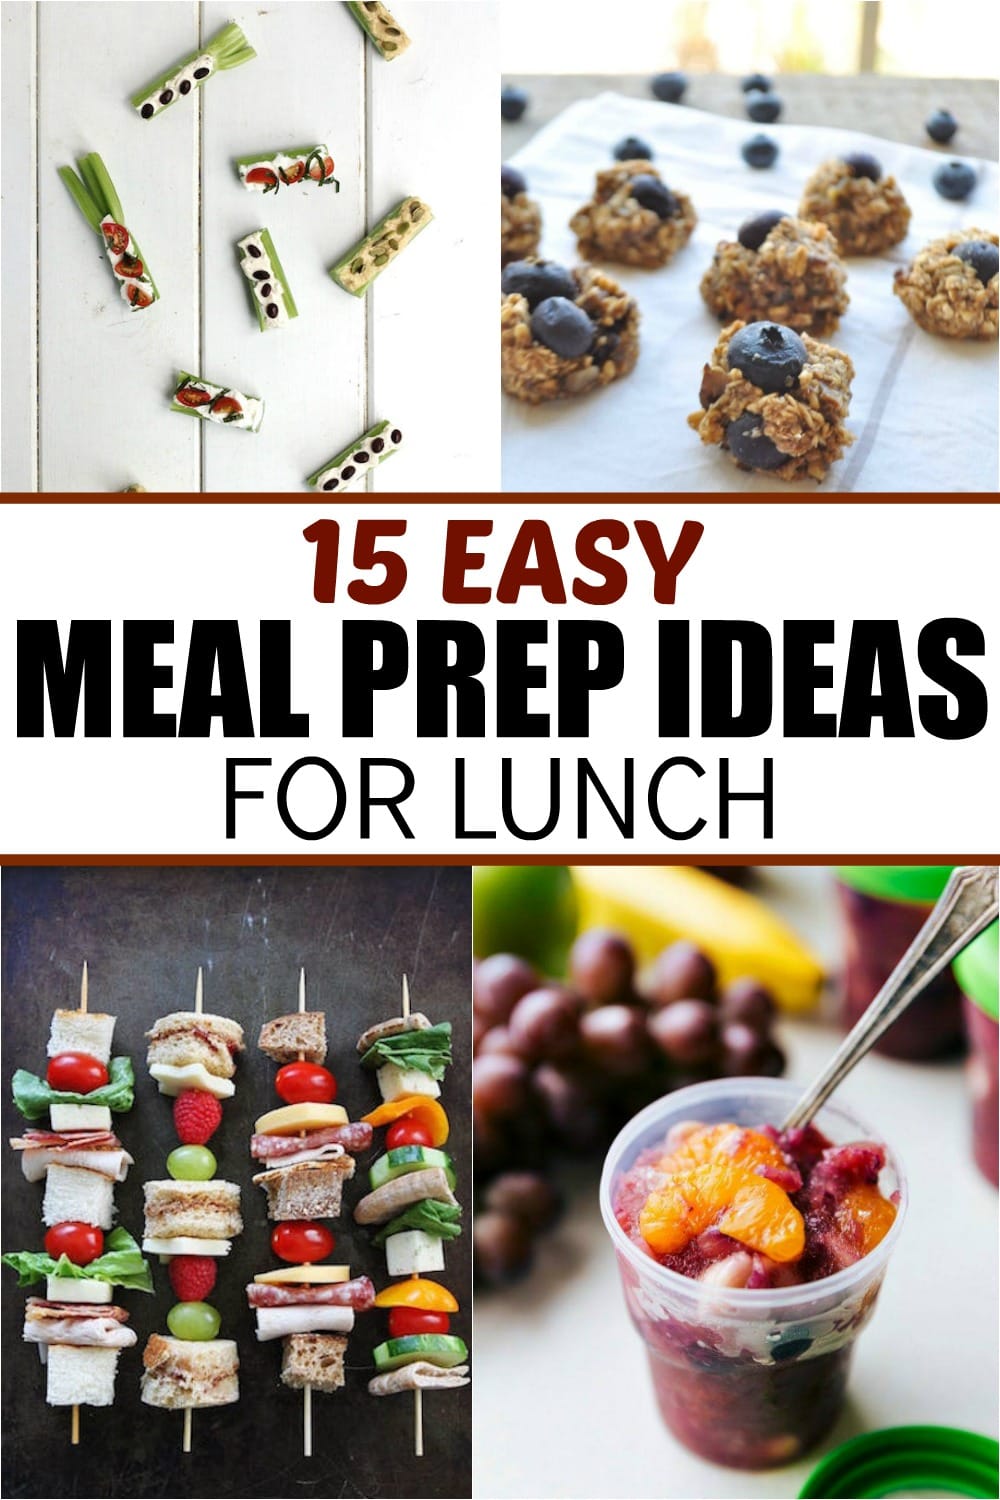 I love quick and easy meal prep ideas for lunch and this post has some great ideas! Good read!!